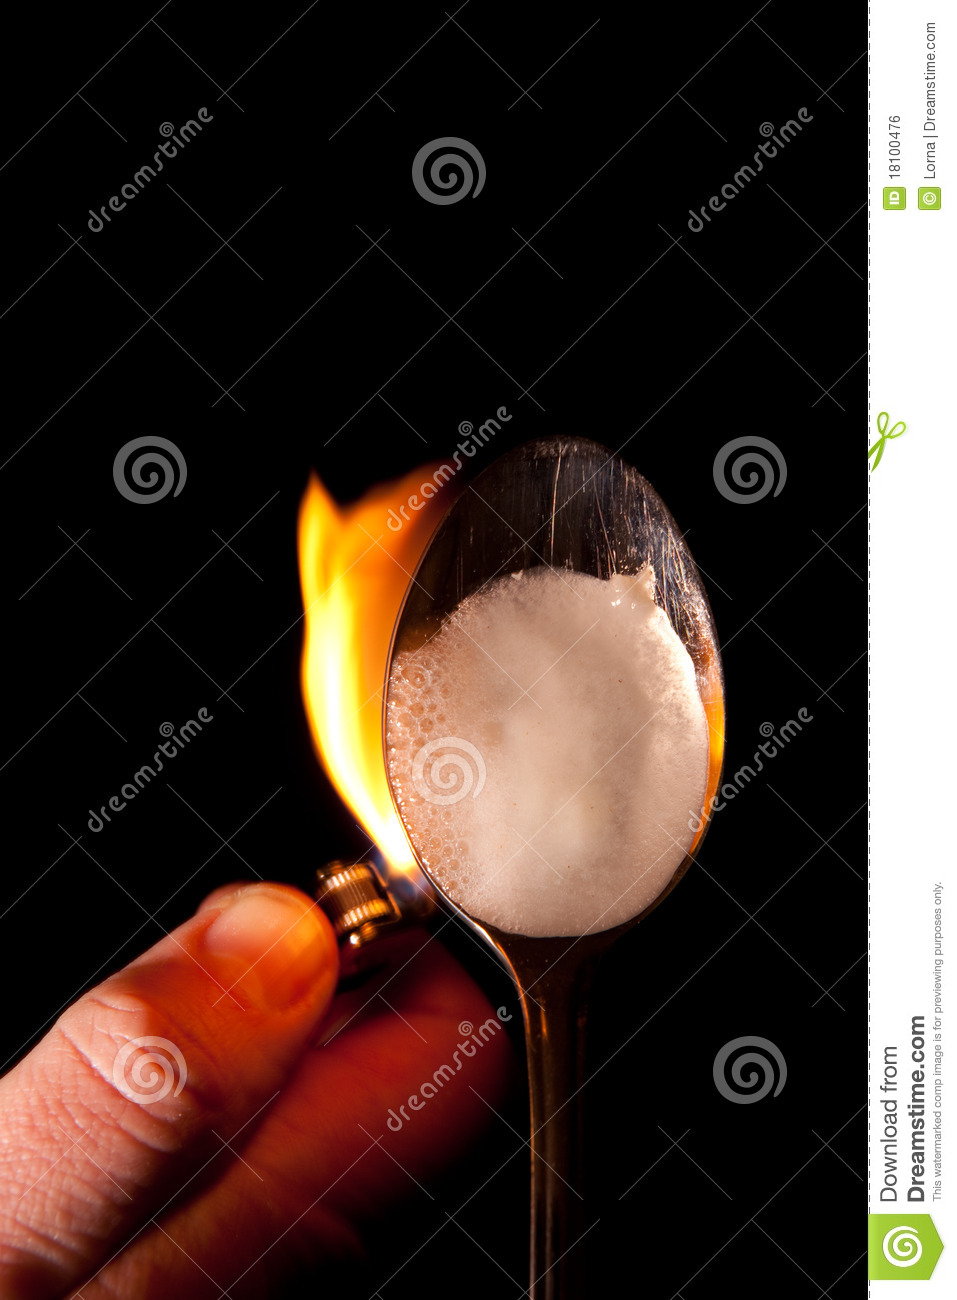 Heroin Spoon Flame Drugs Royalty Free Stock Image   Image  18100476